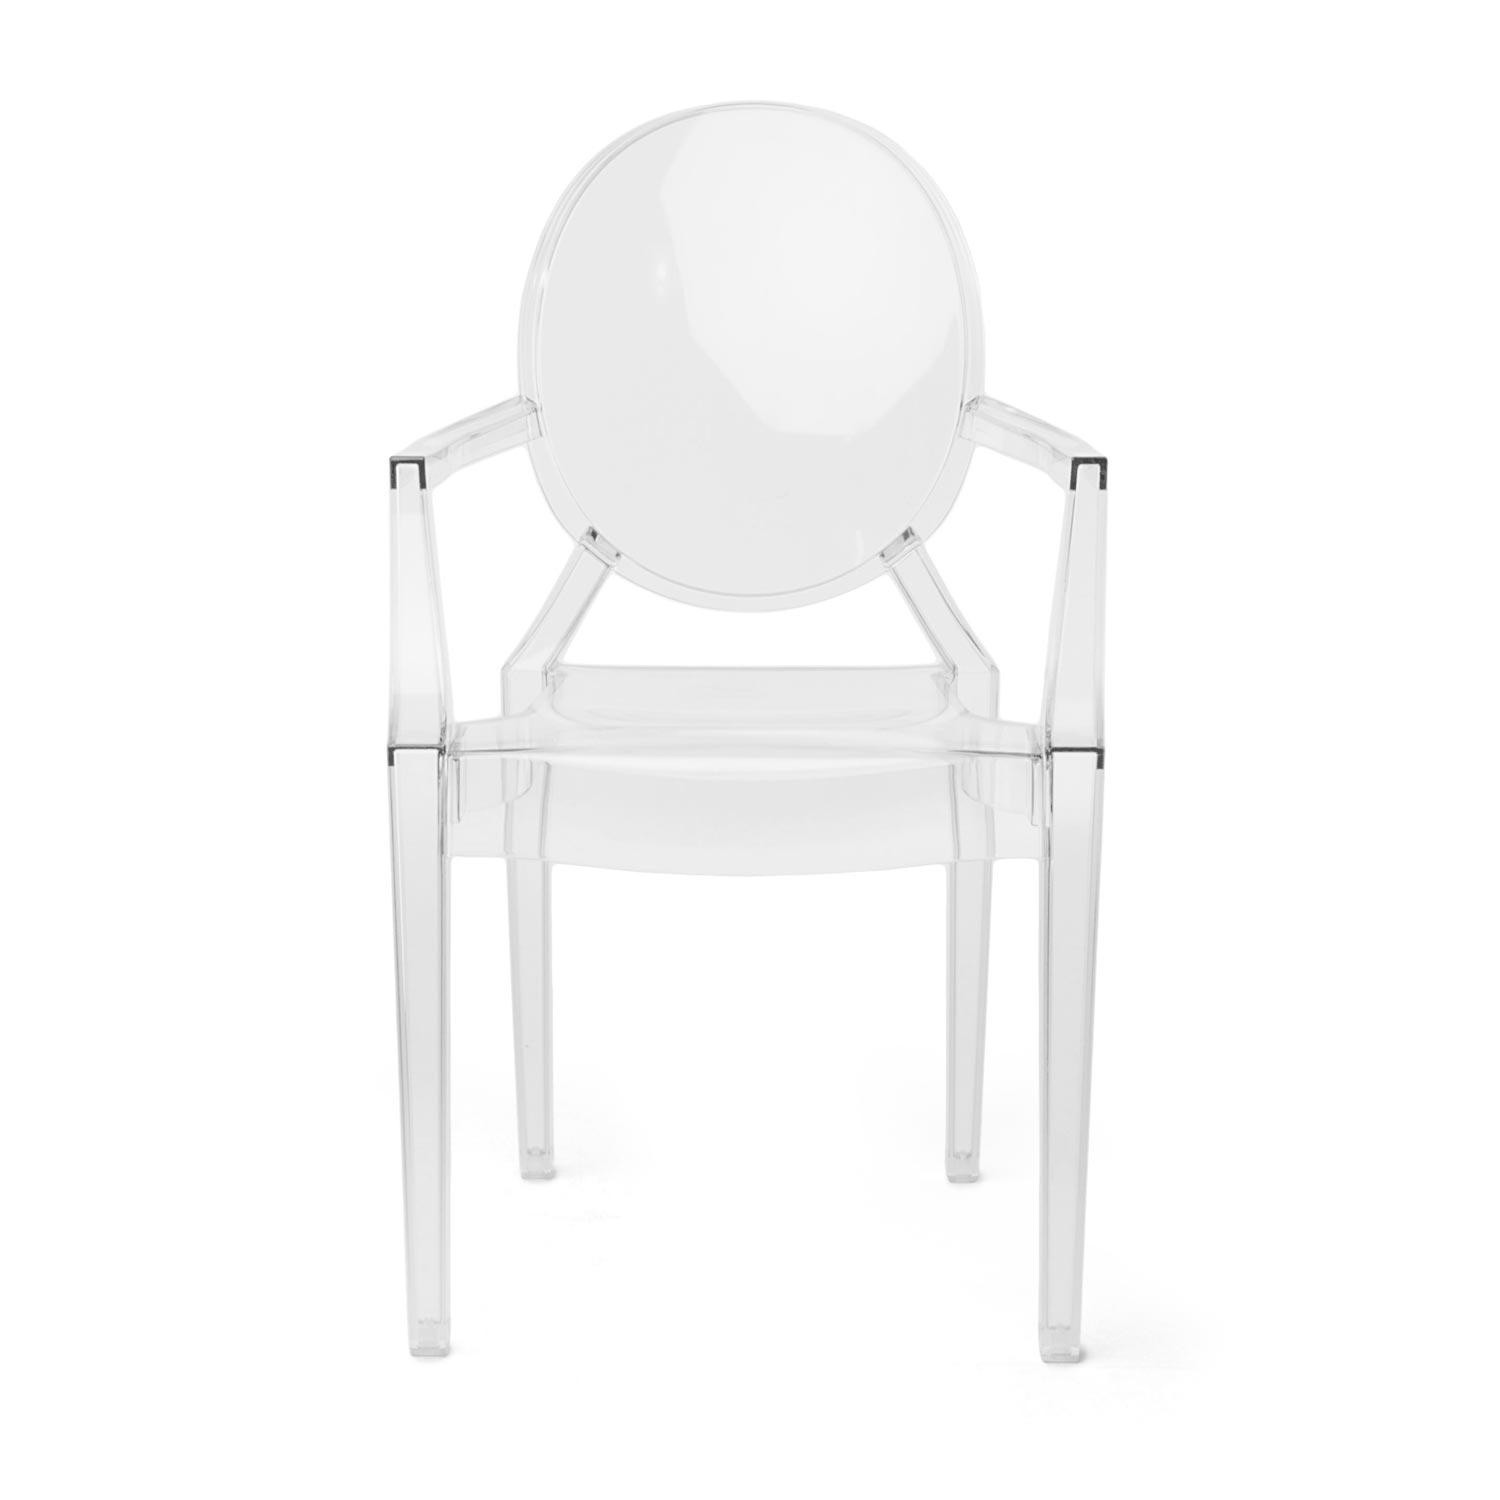 LOU LOU GHOST children's chair